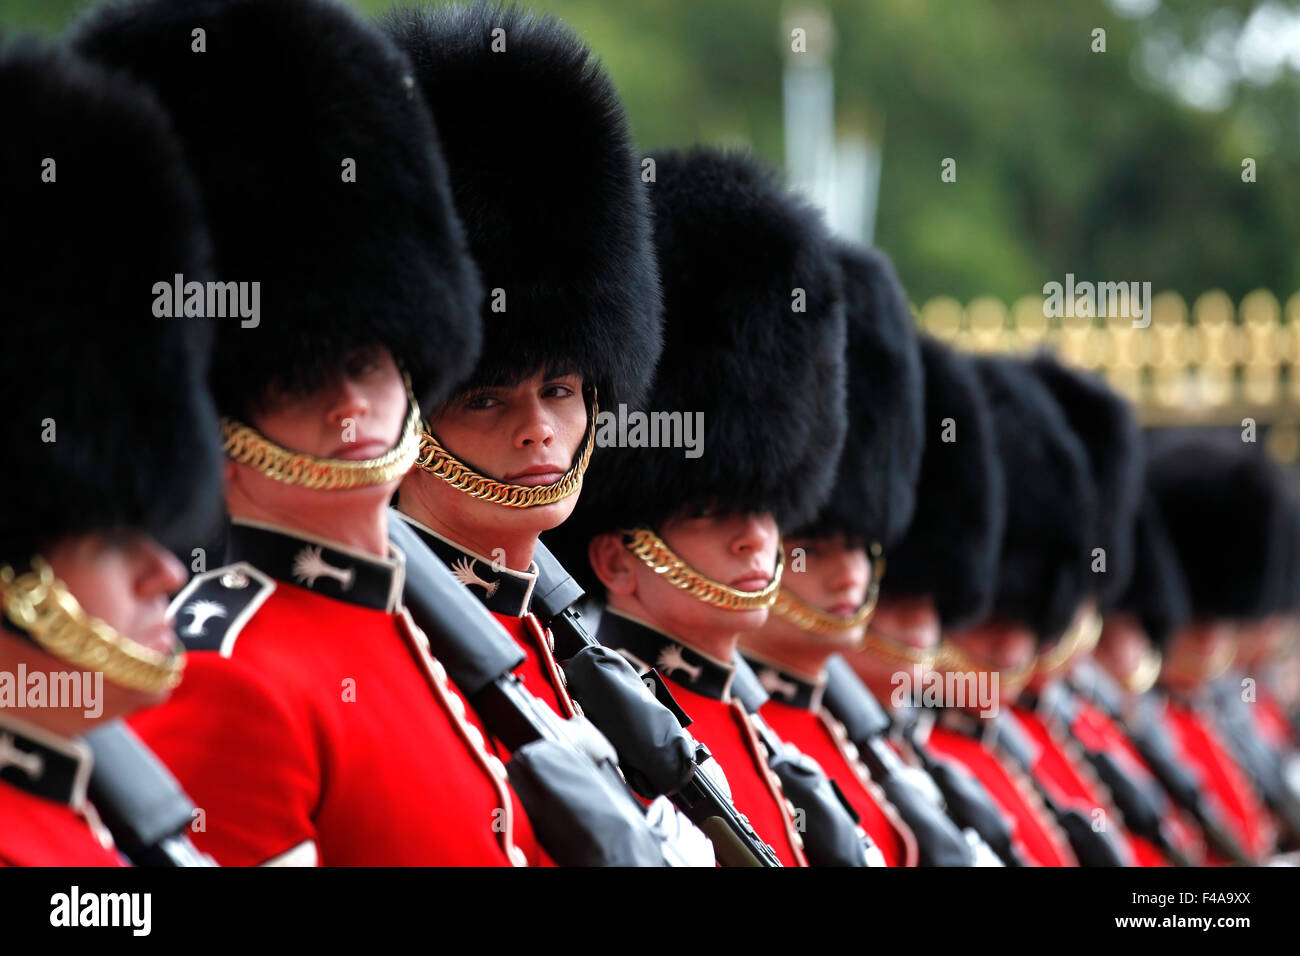 London, UK. 8th Sep, 2015. File photo shows British Royal Guards attending the changing ceremony at the Buckingham Palace in London Sept. 8, 2015. The changing ceremony of the British Royal Guards is held at noon at the Buckingham Palace every day from May to July and evey other day in other months. © Han Yan/Xinhua/Alamy Live News Stock Photo